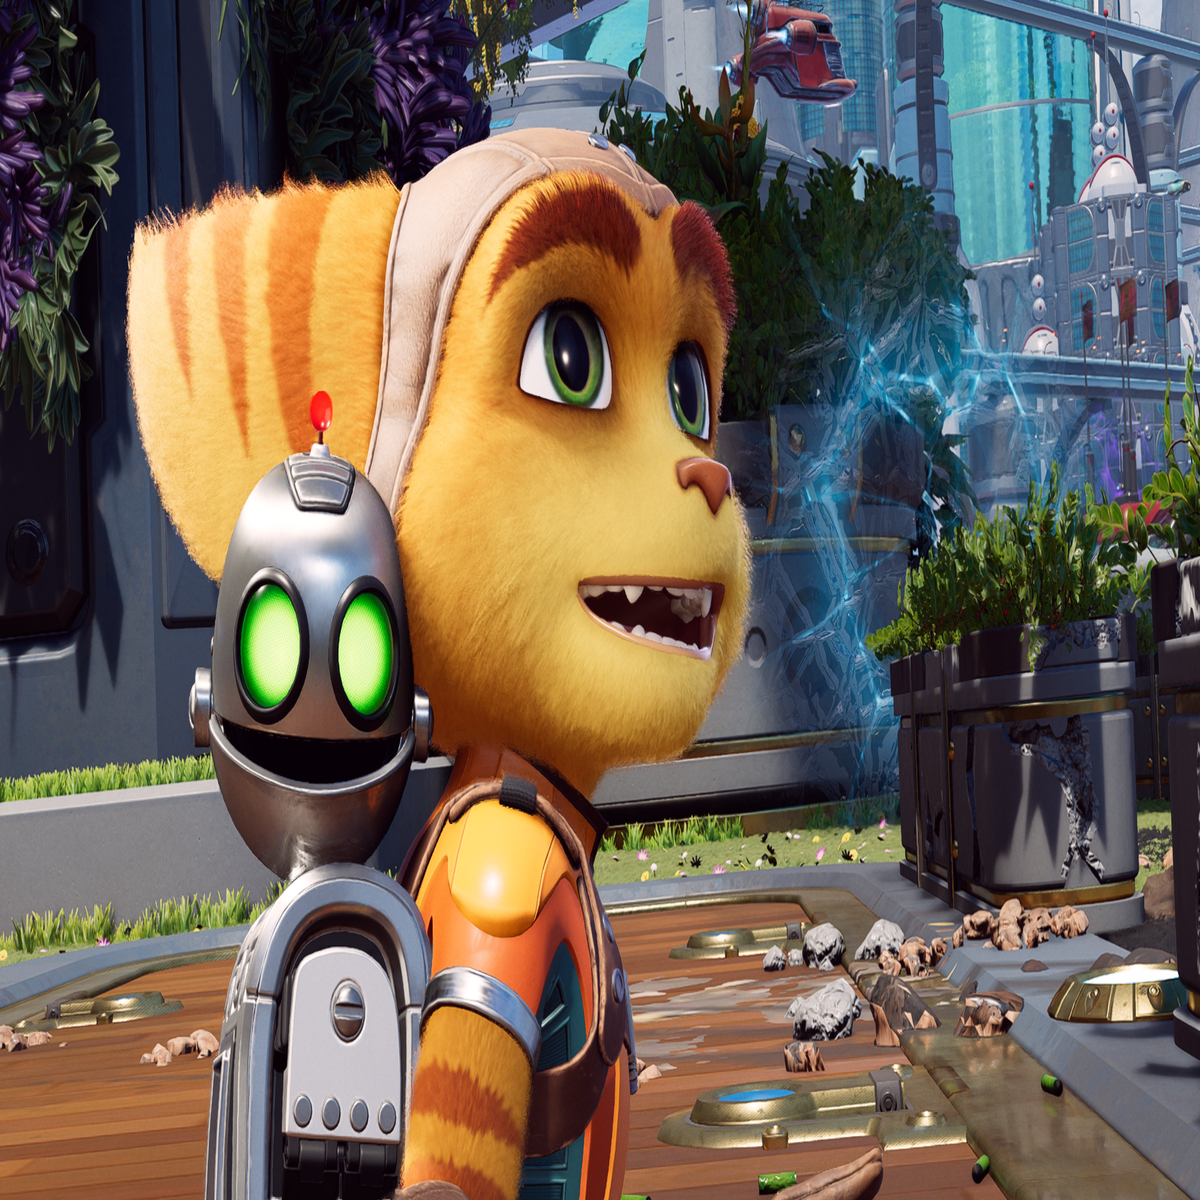 Ratchet & Clank: Rift Apart - How To Earn Bolts Fast Guide